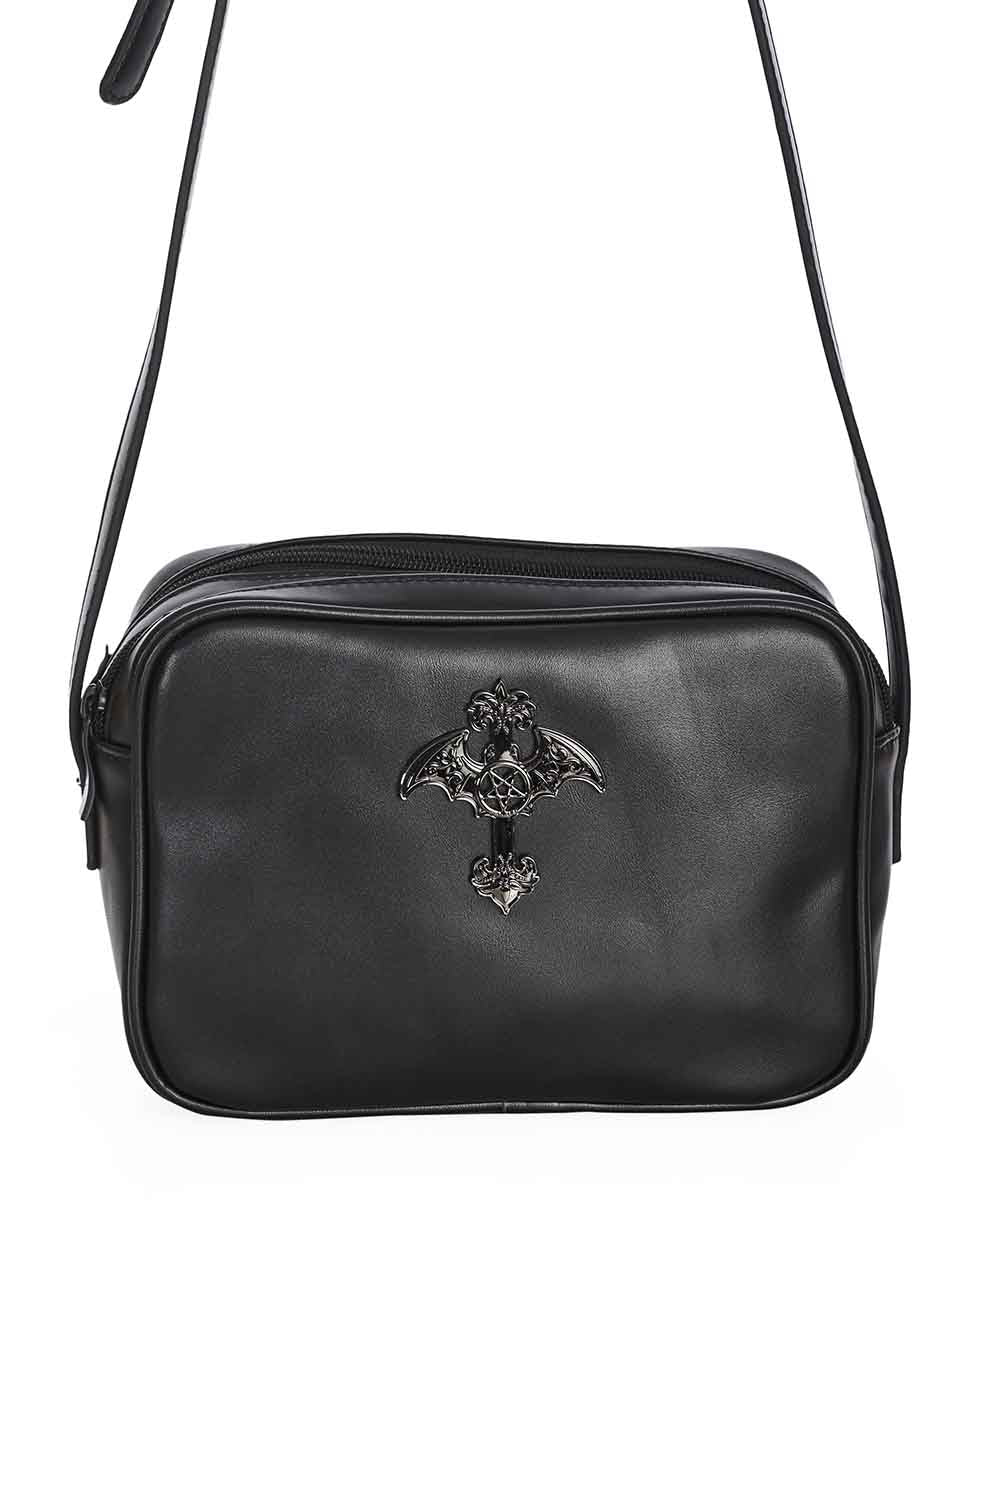 Banned Alternative YOU SHALL NOT FIND ME CROSS BODY BAG